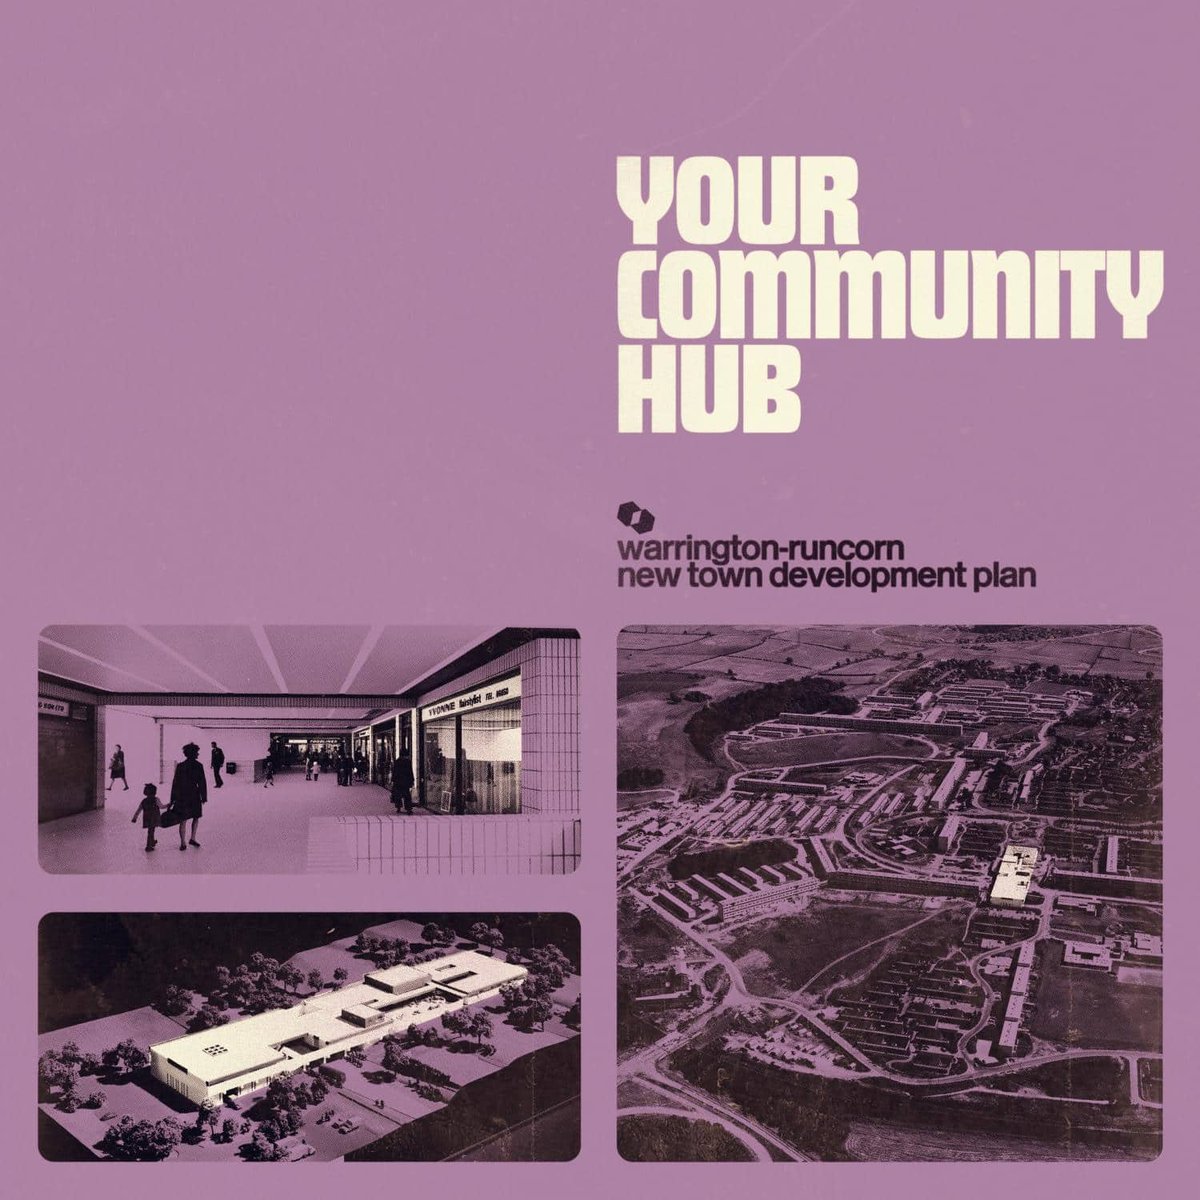 WIN! - An LP Copy of Warrington-Runcorn New Town Development Plan’s ‘Your Community Hub’ @RuncornPlan’s new ambient-electronic album drops next week via @CastlesInSpace We’re giving away a copy to a customer who likes, shares, and gives us a follow. normanrecords.com/records/203112…